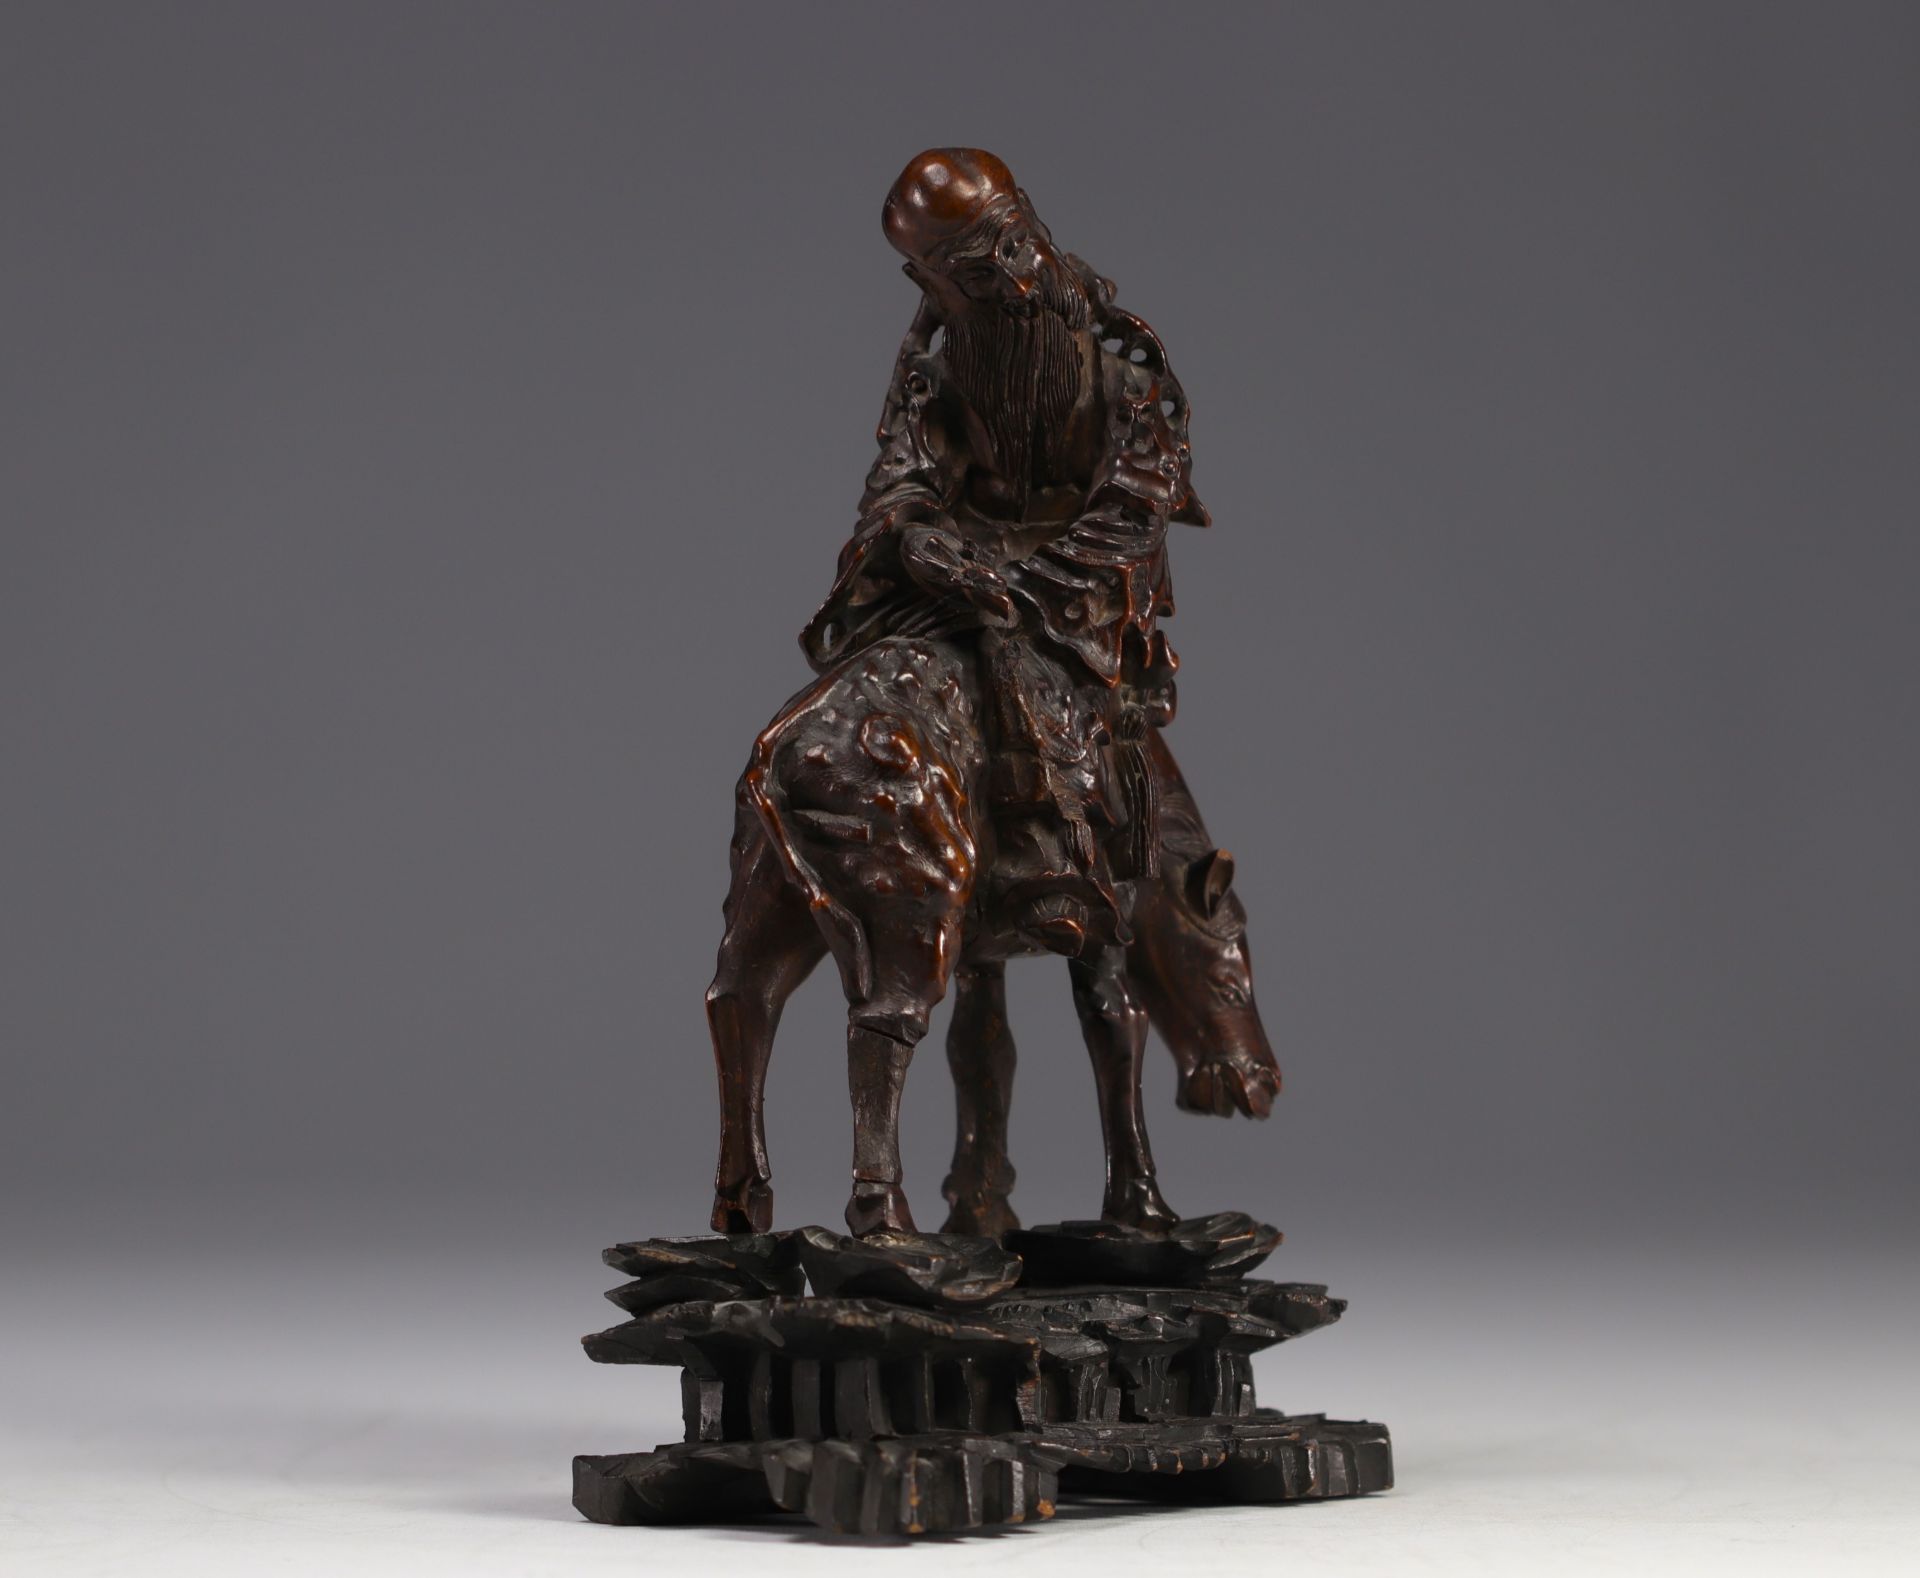 Wooden "root" sculpture of a figure on horseback from China, late 18th century - Image 4 of 4